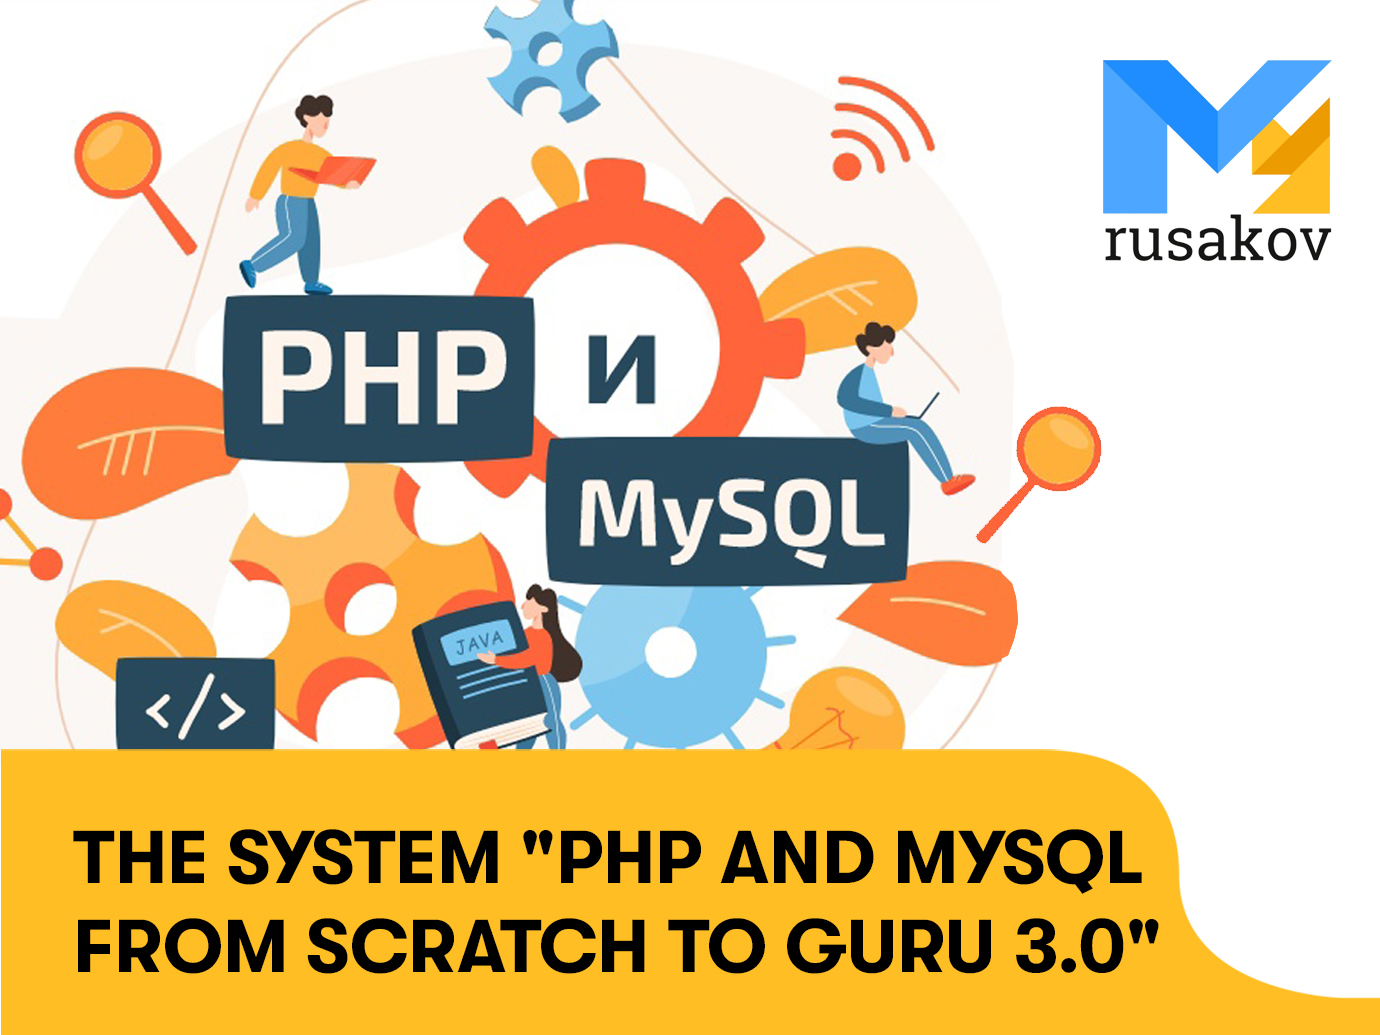 The system “PHP and MySQL from Scratch to Guru 3.0“